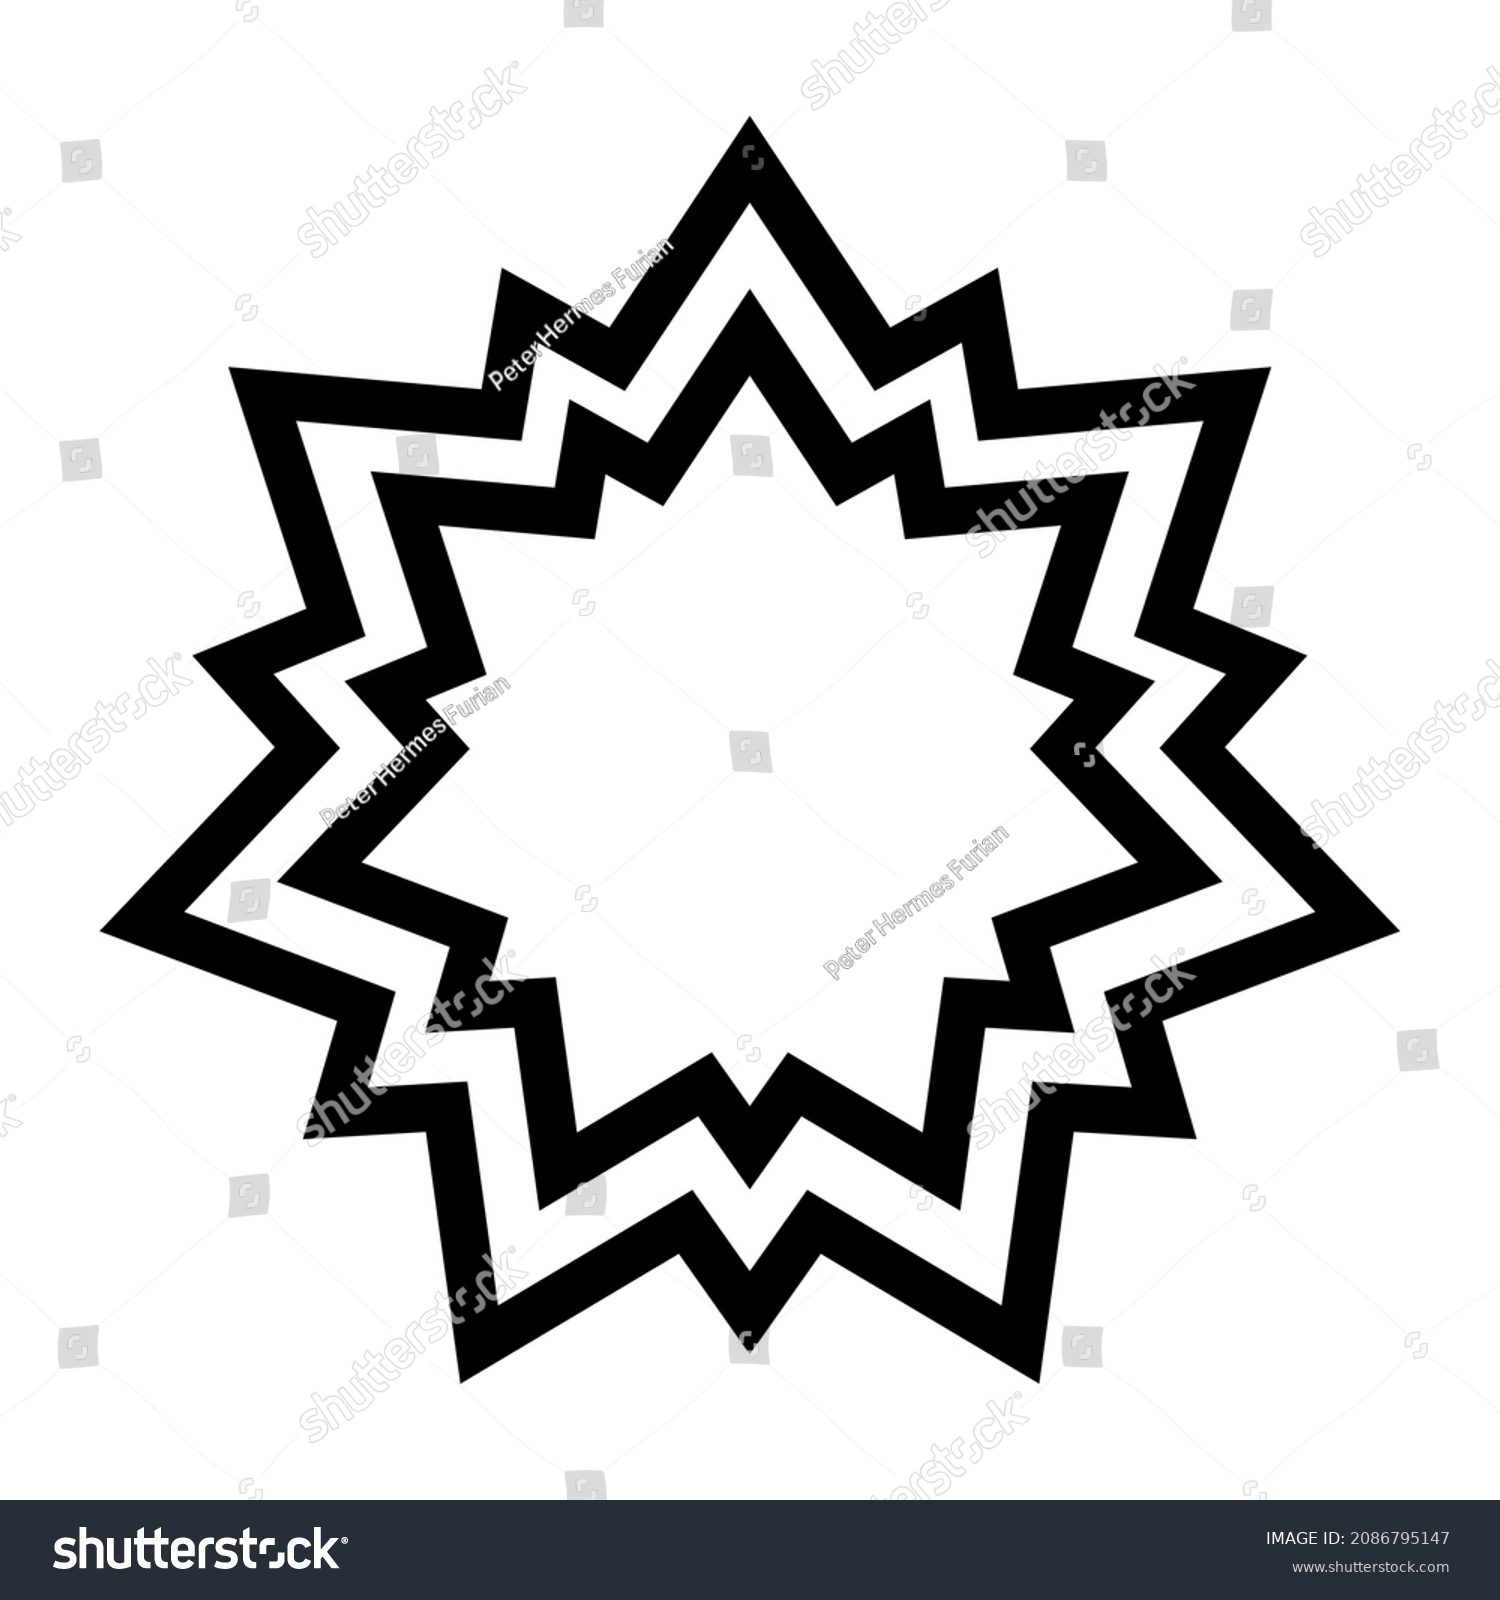 SVG of Two black fourteen-pointed stars, forming a powerful and bold symbol, based upon the shape of old bastion forts, with typical star shapes. Isolated, black and white illustration, on white background. svg